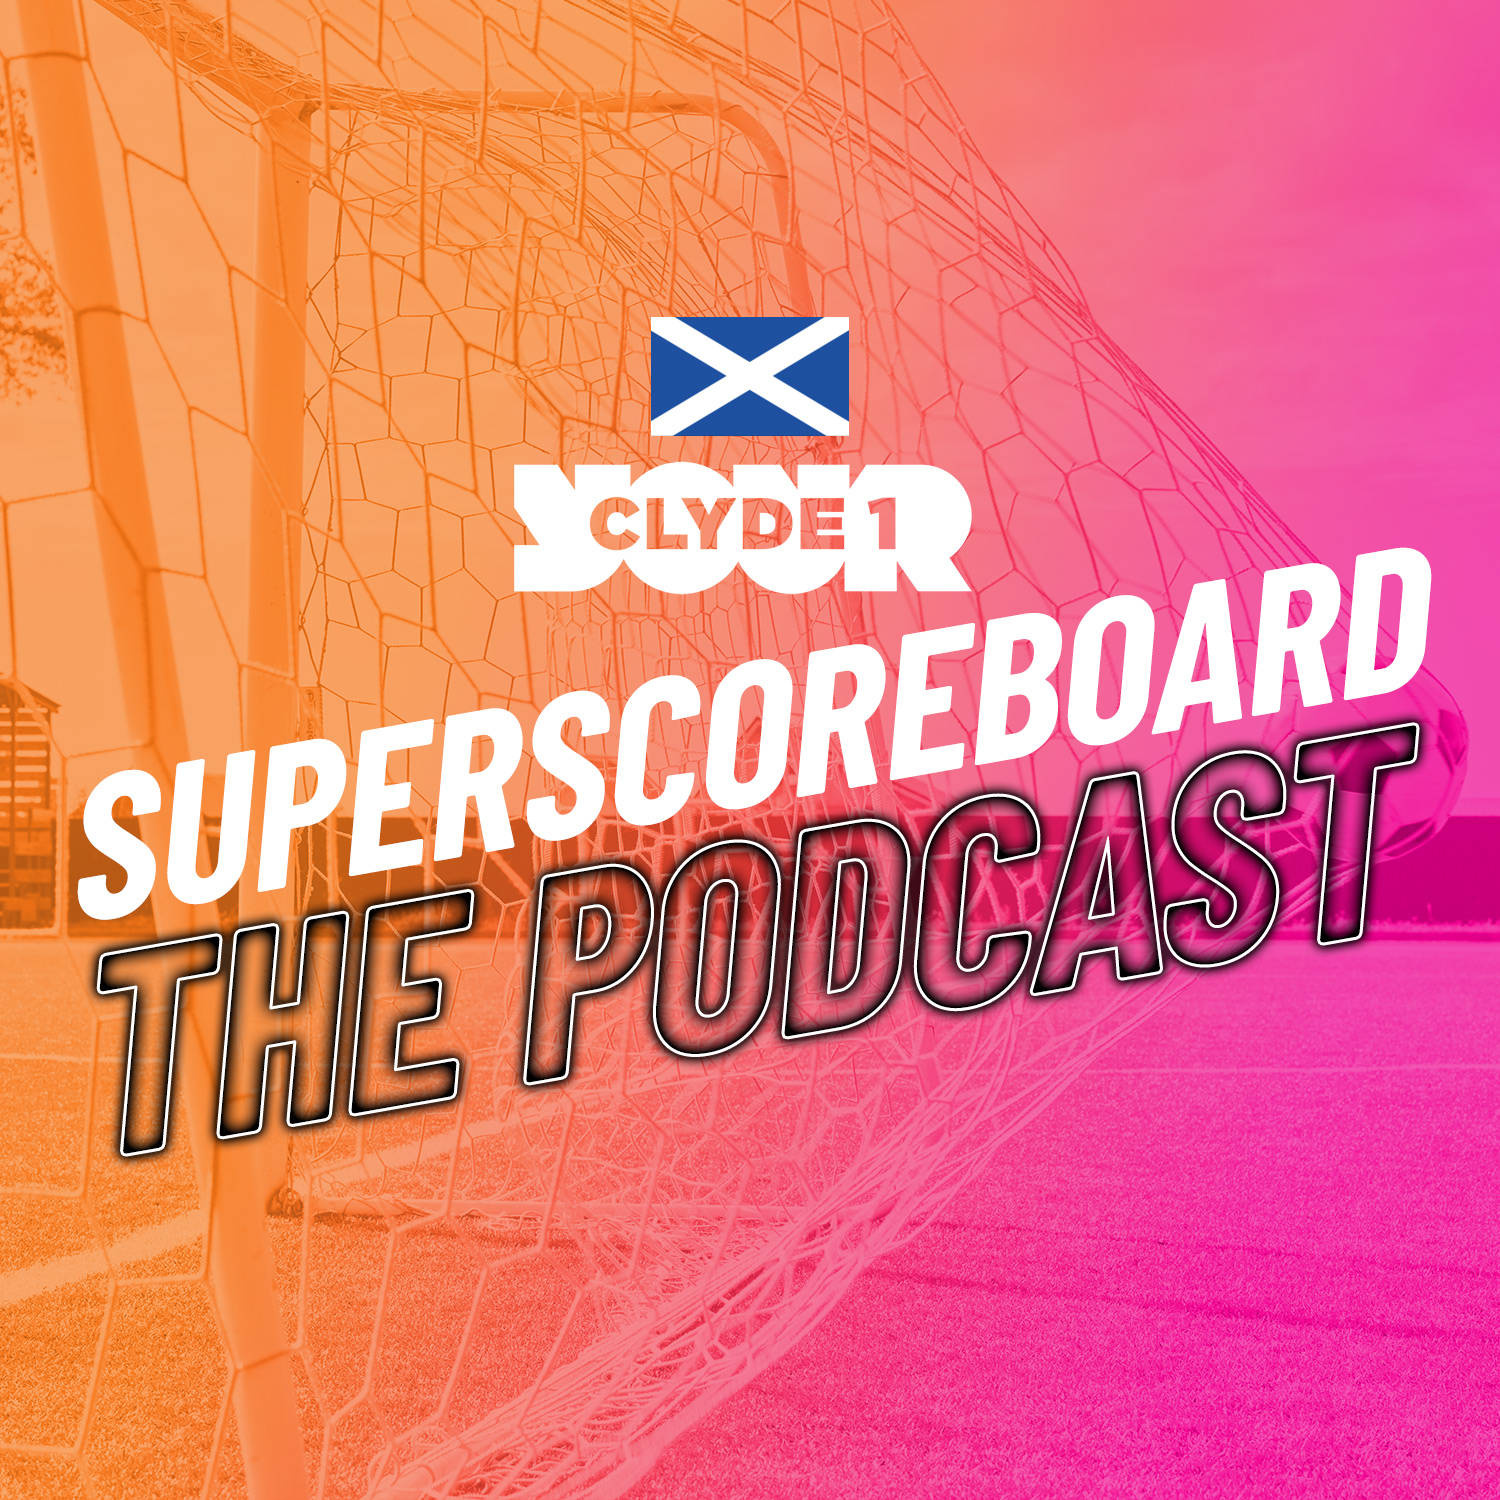 Saturday 27th January Clyde 1 Superscoreboard Part 2